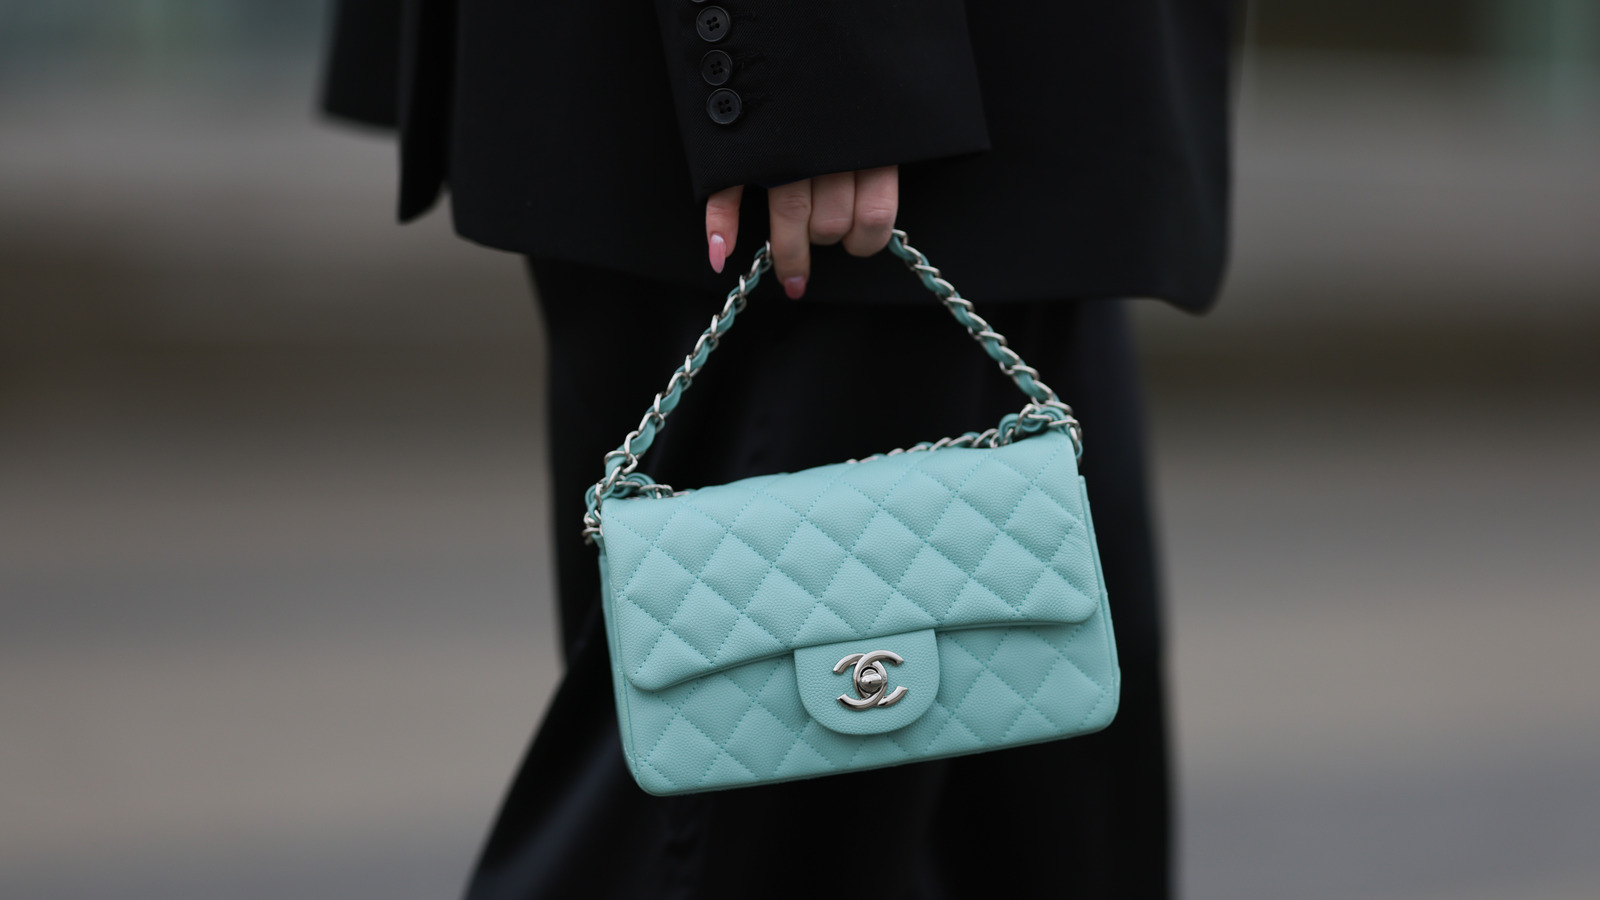 Chanel Resale Value & How to Maximize Profits - Academy by FASHIONPHILE